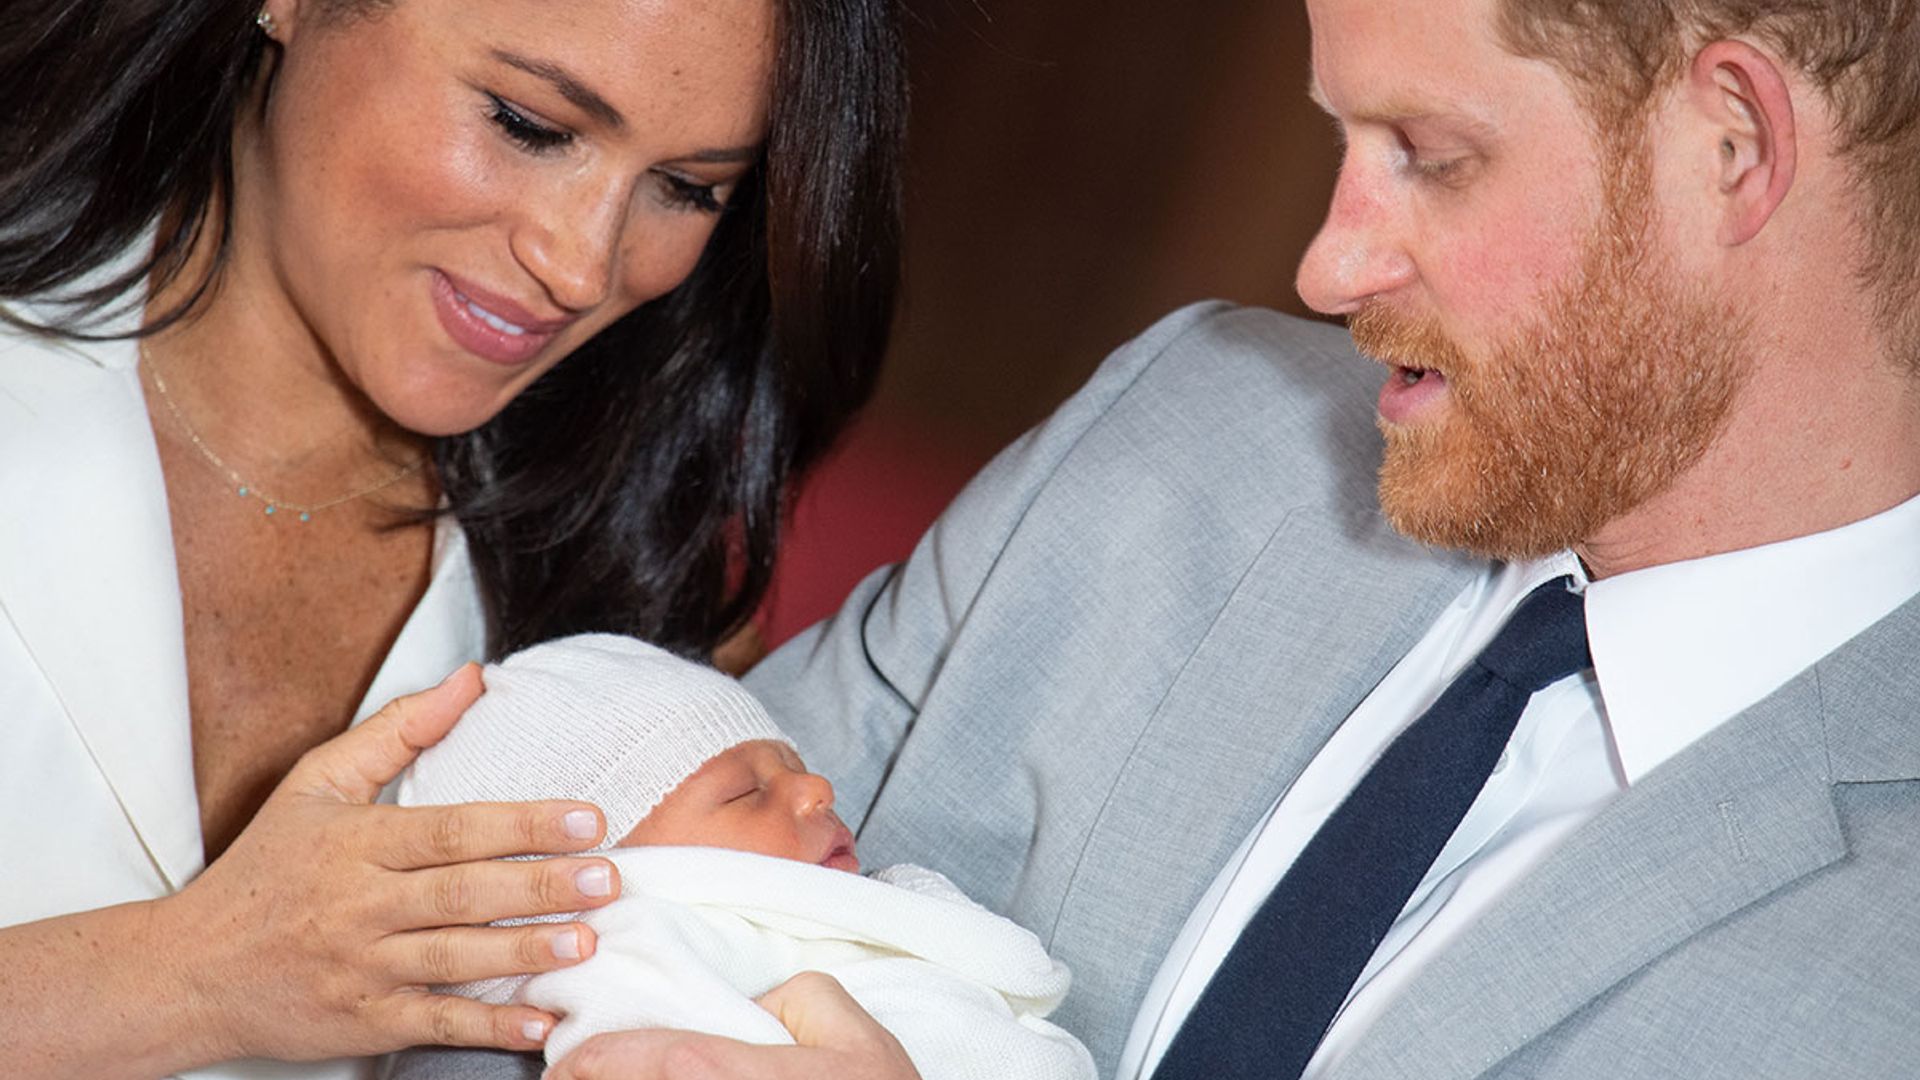 meghan markle prince harry baby archie